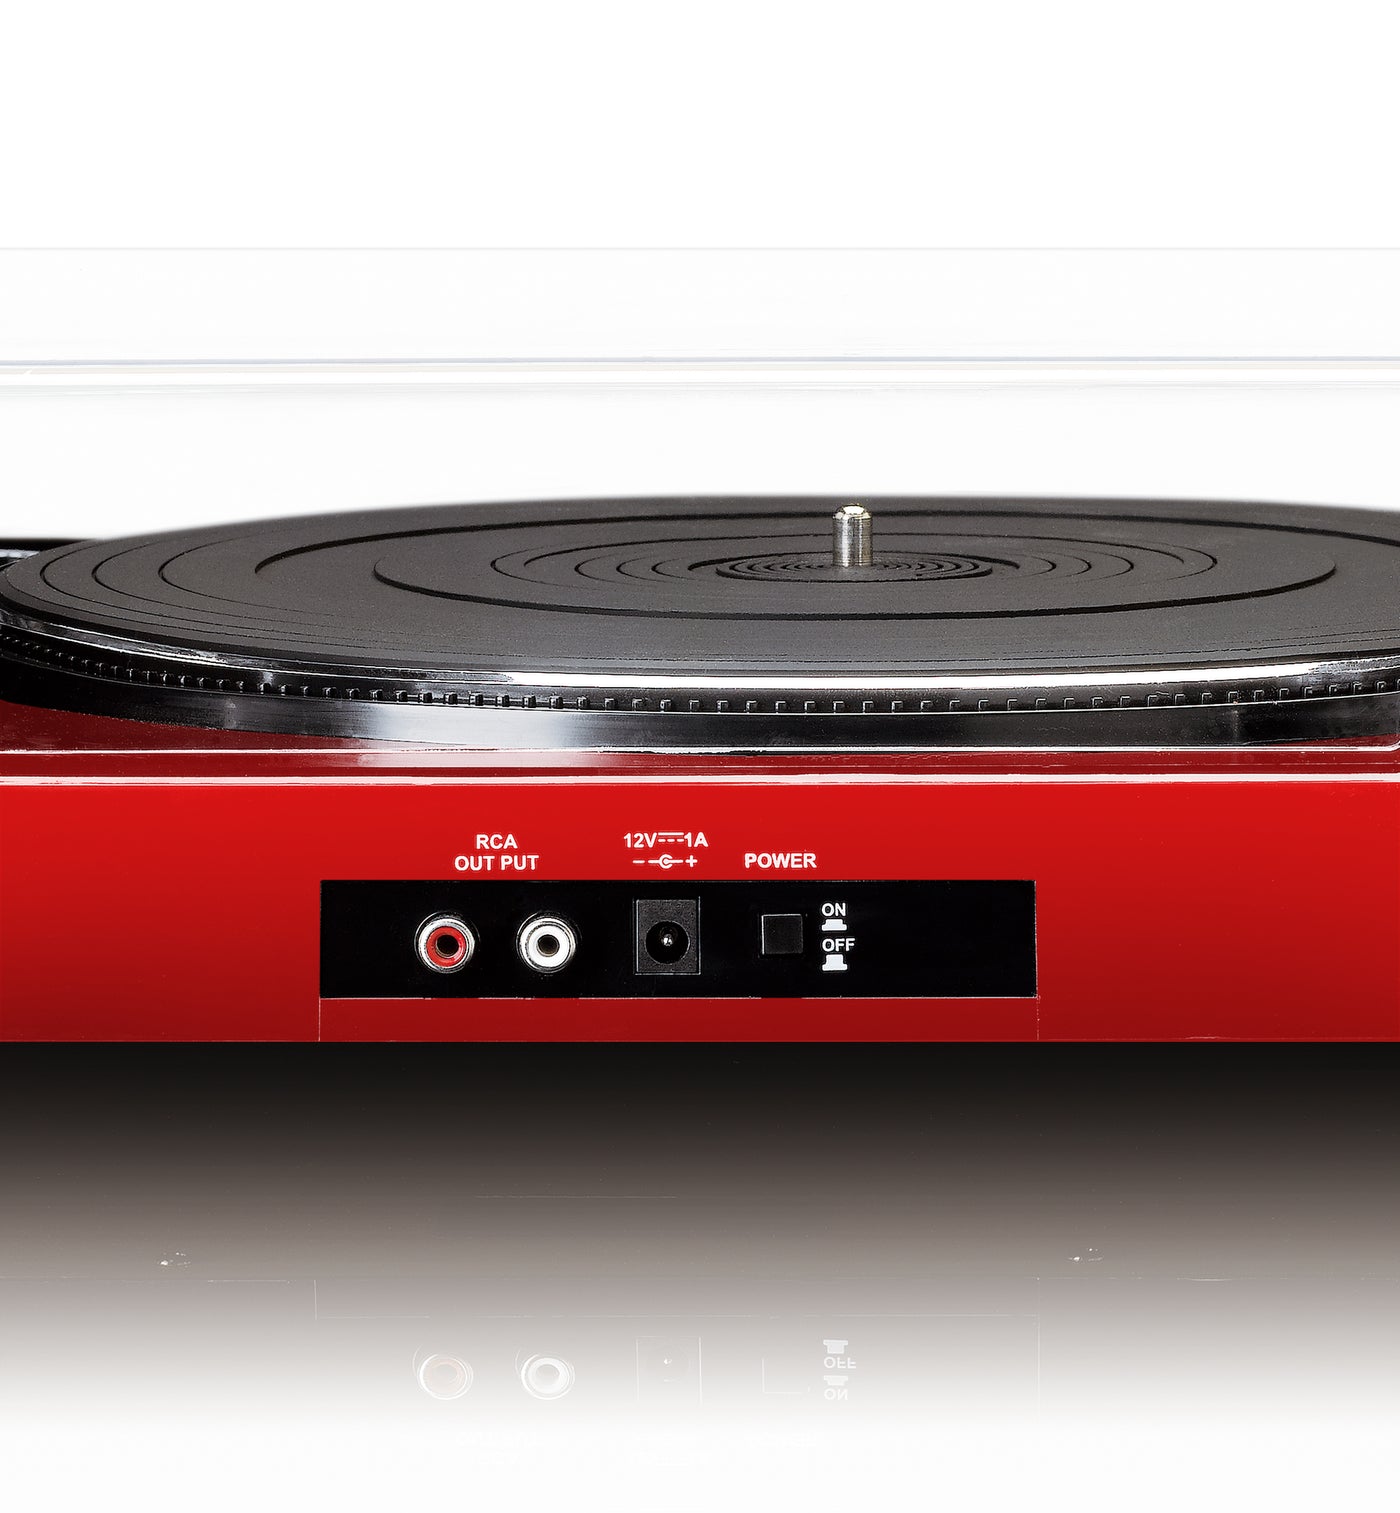 LENCO L-85 Red - Turntable with USB direct encoding - Red